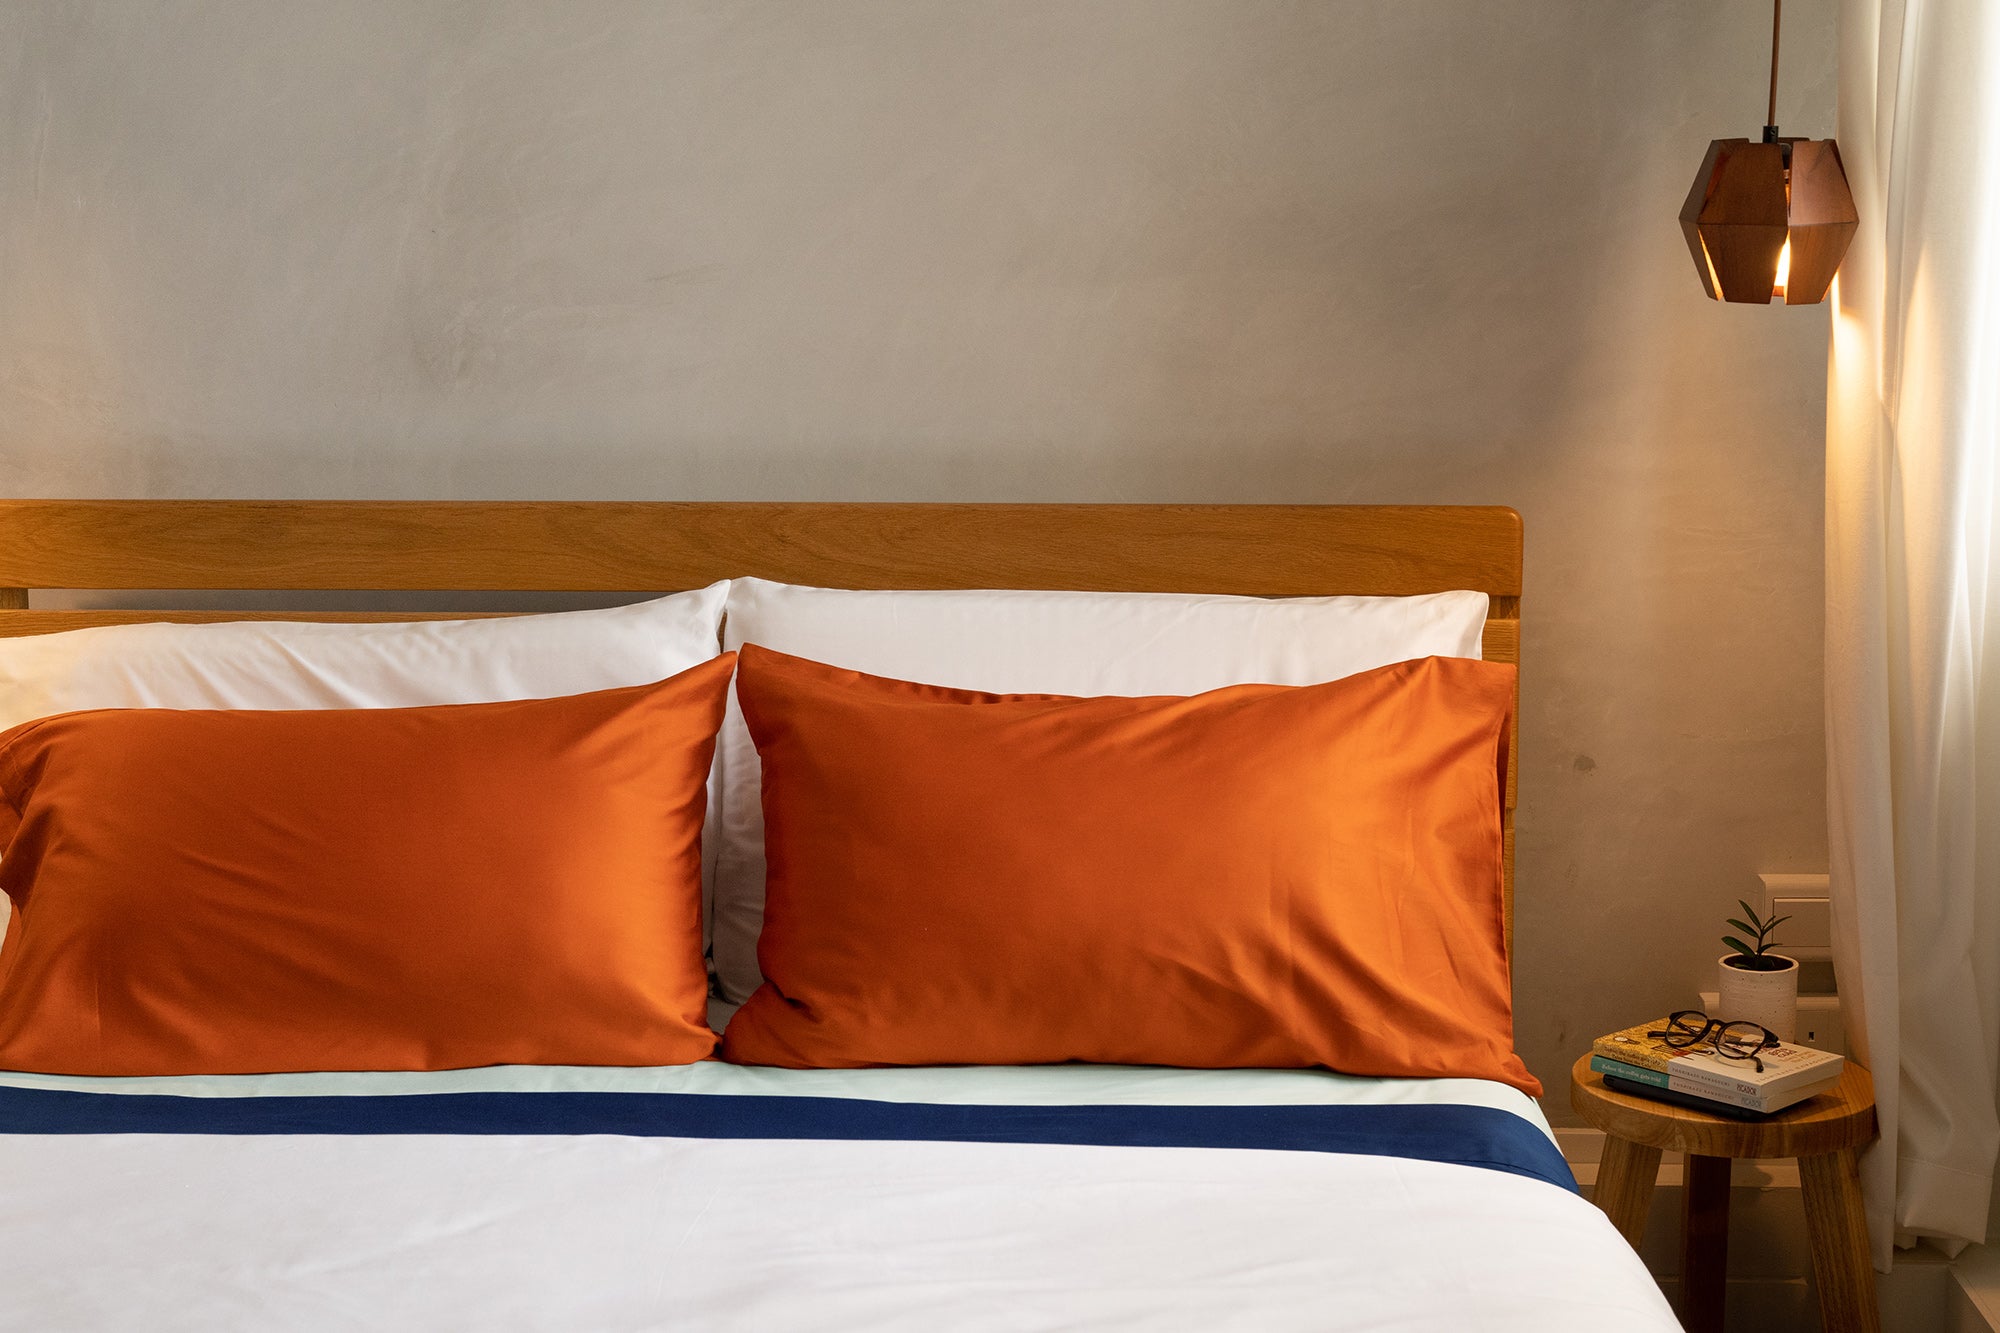 burnt orange organic cotton bedsheets against cement screed wall